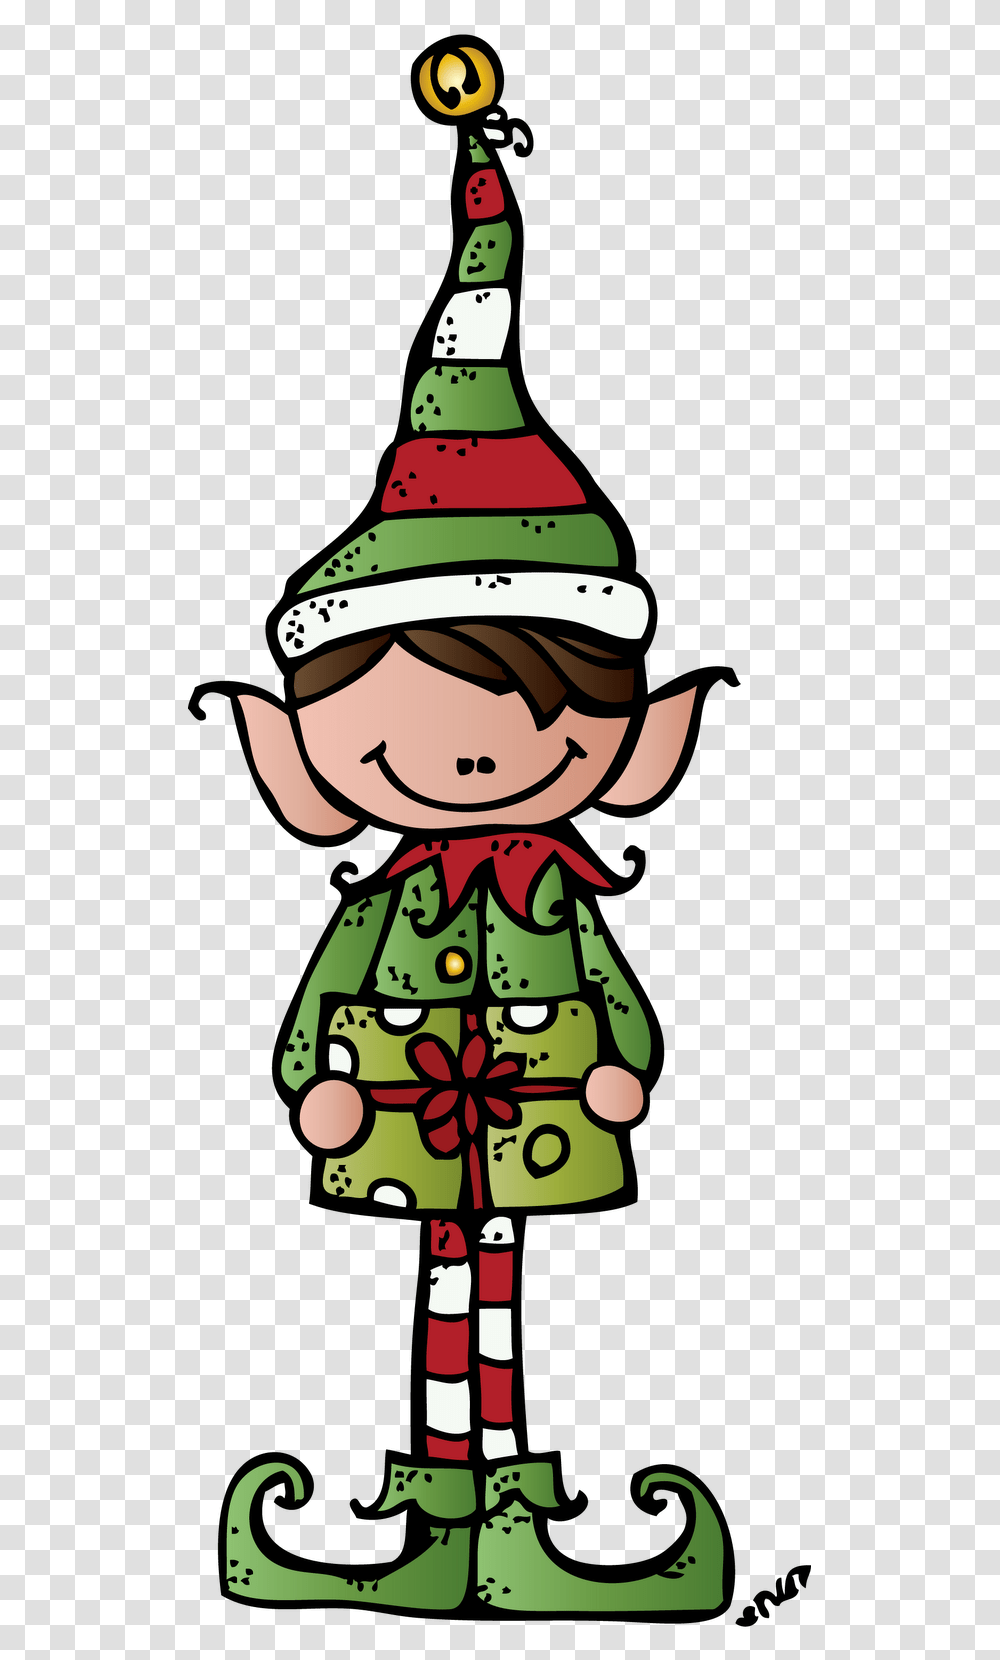 Busy Bees Elf On The Shelf Unit Postedcant Wait, Tree, Plant, Snowman, Winter Transparent Png